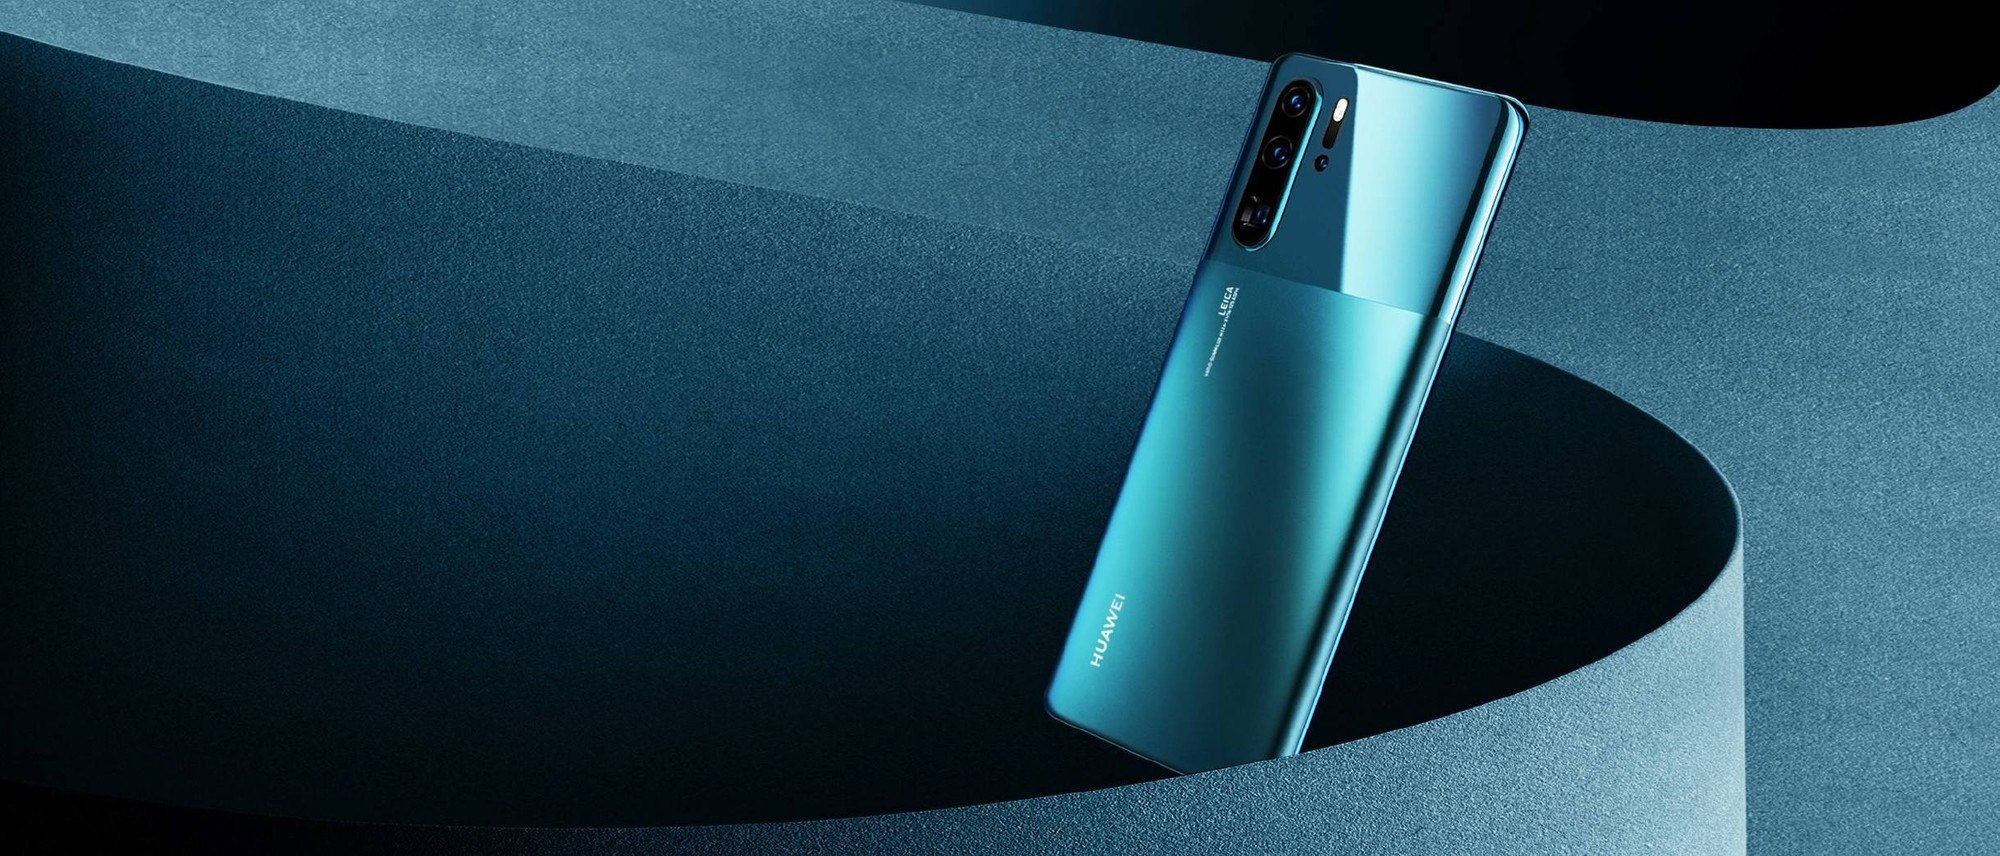 Huawei P30 Pro New Edition design